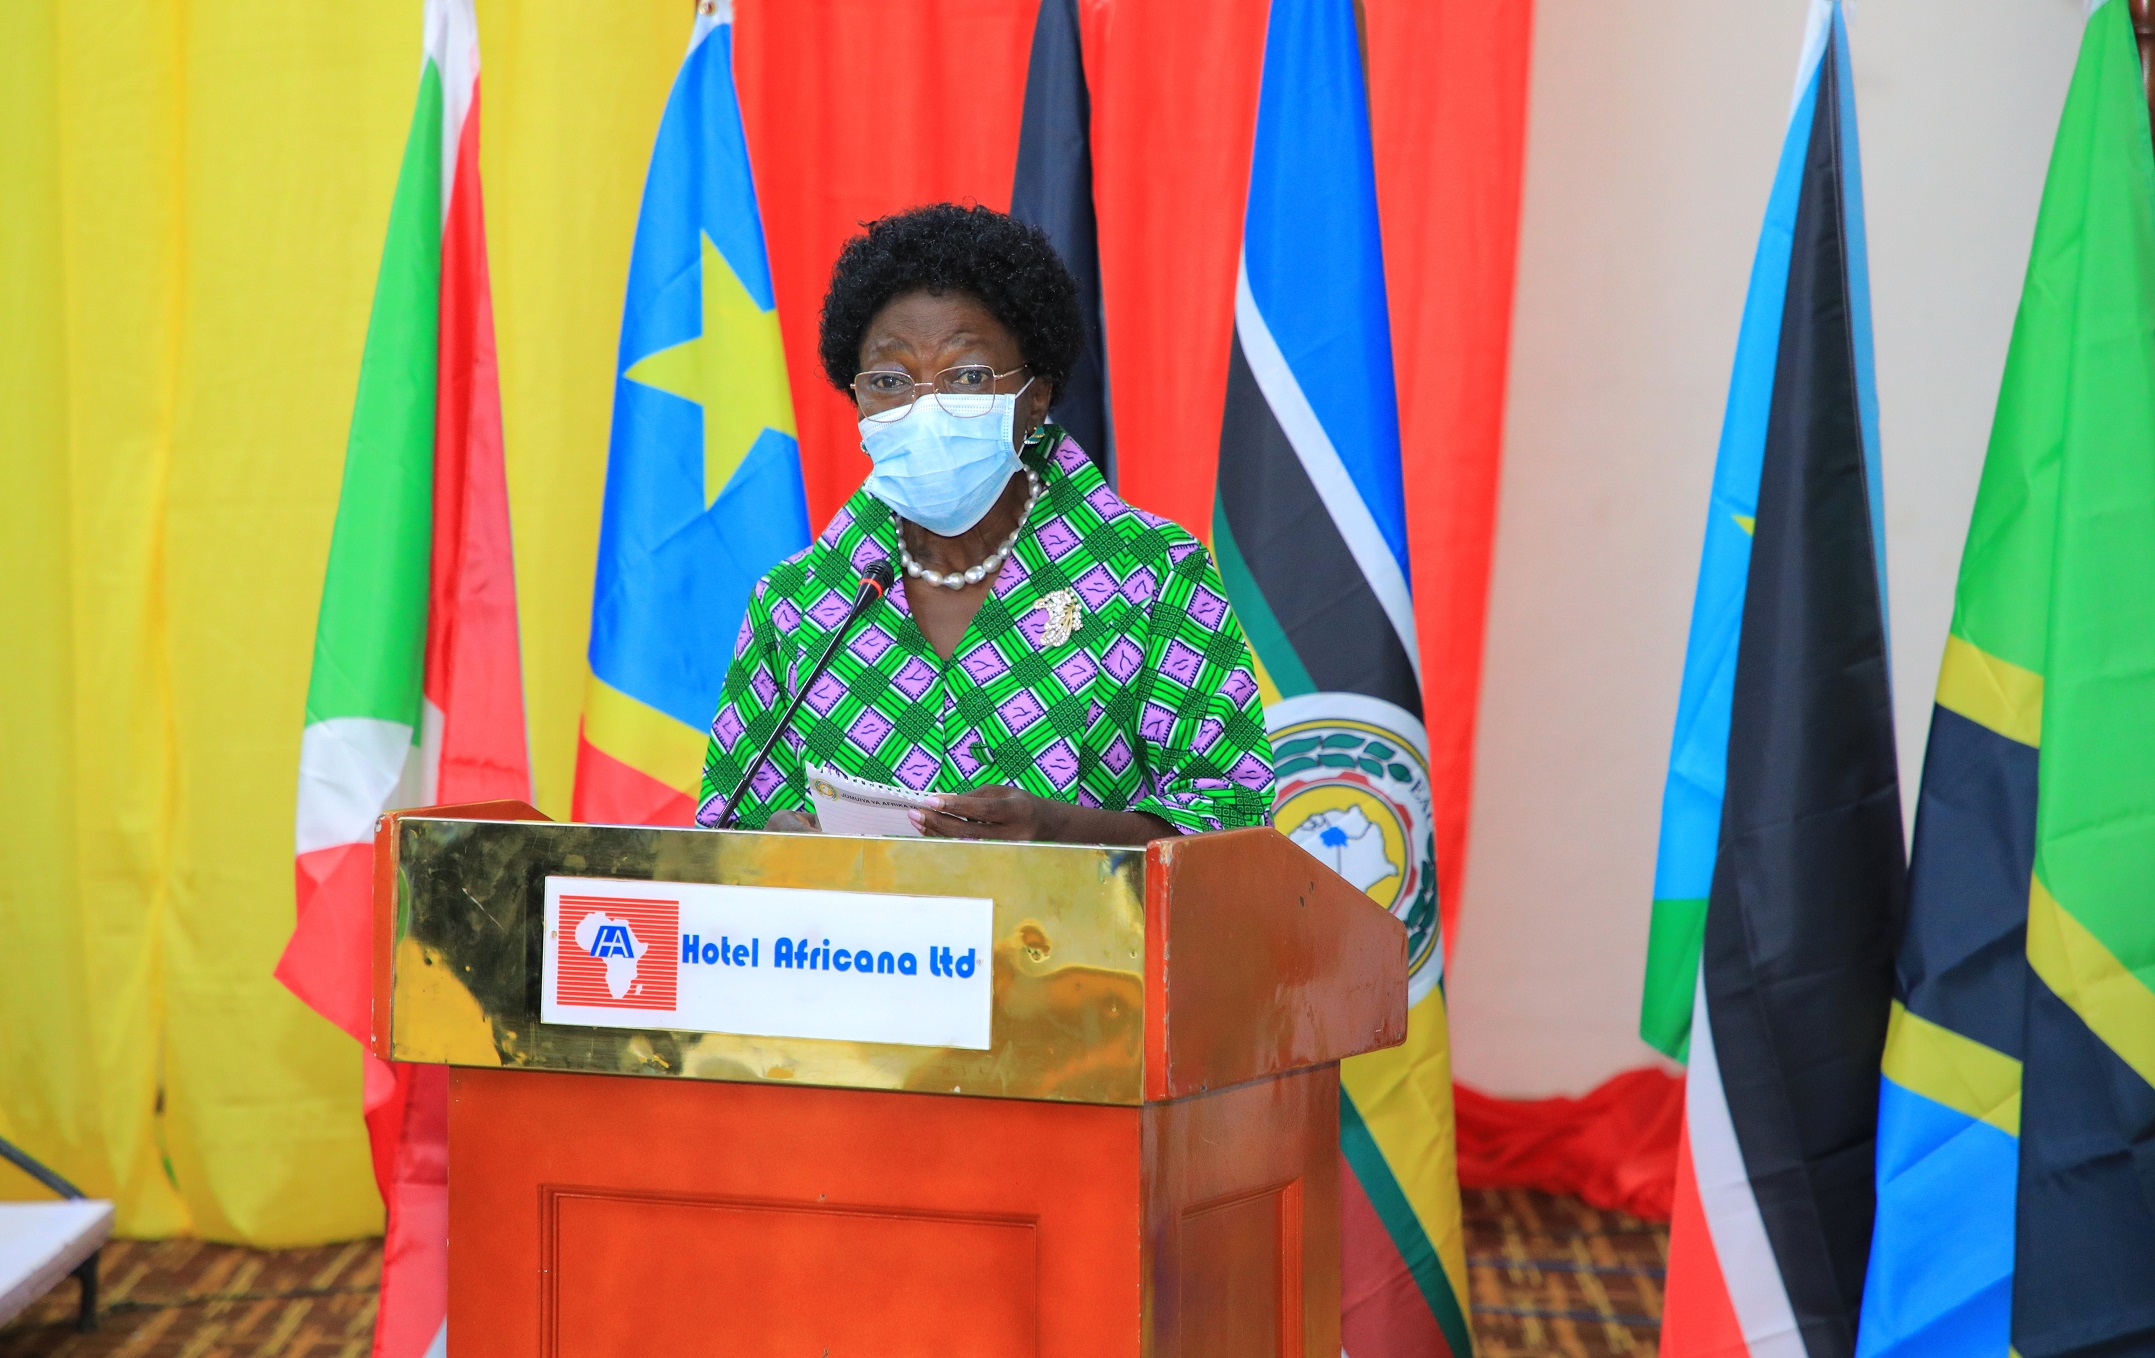 Uganda’s 1st Deputy Prime Minister and Minister for EAC Affairs, Rt. Hon. Rebecca Kadaga, addresses delegates when she officially opened the 2nd EAC World Kiswahili Day celebrations in Kampala.